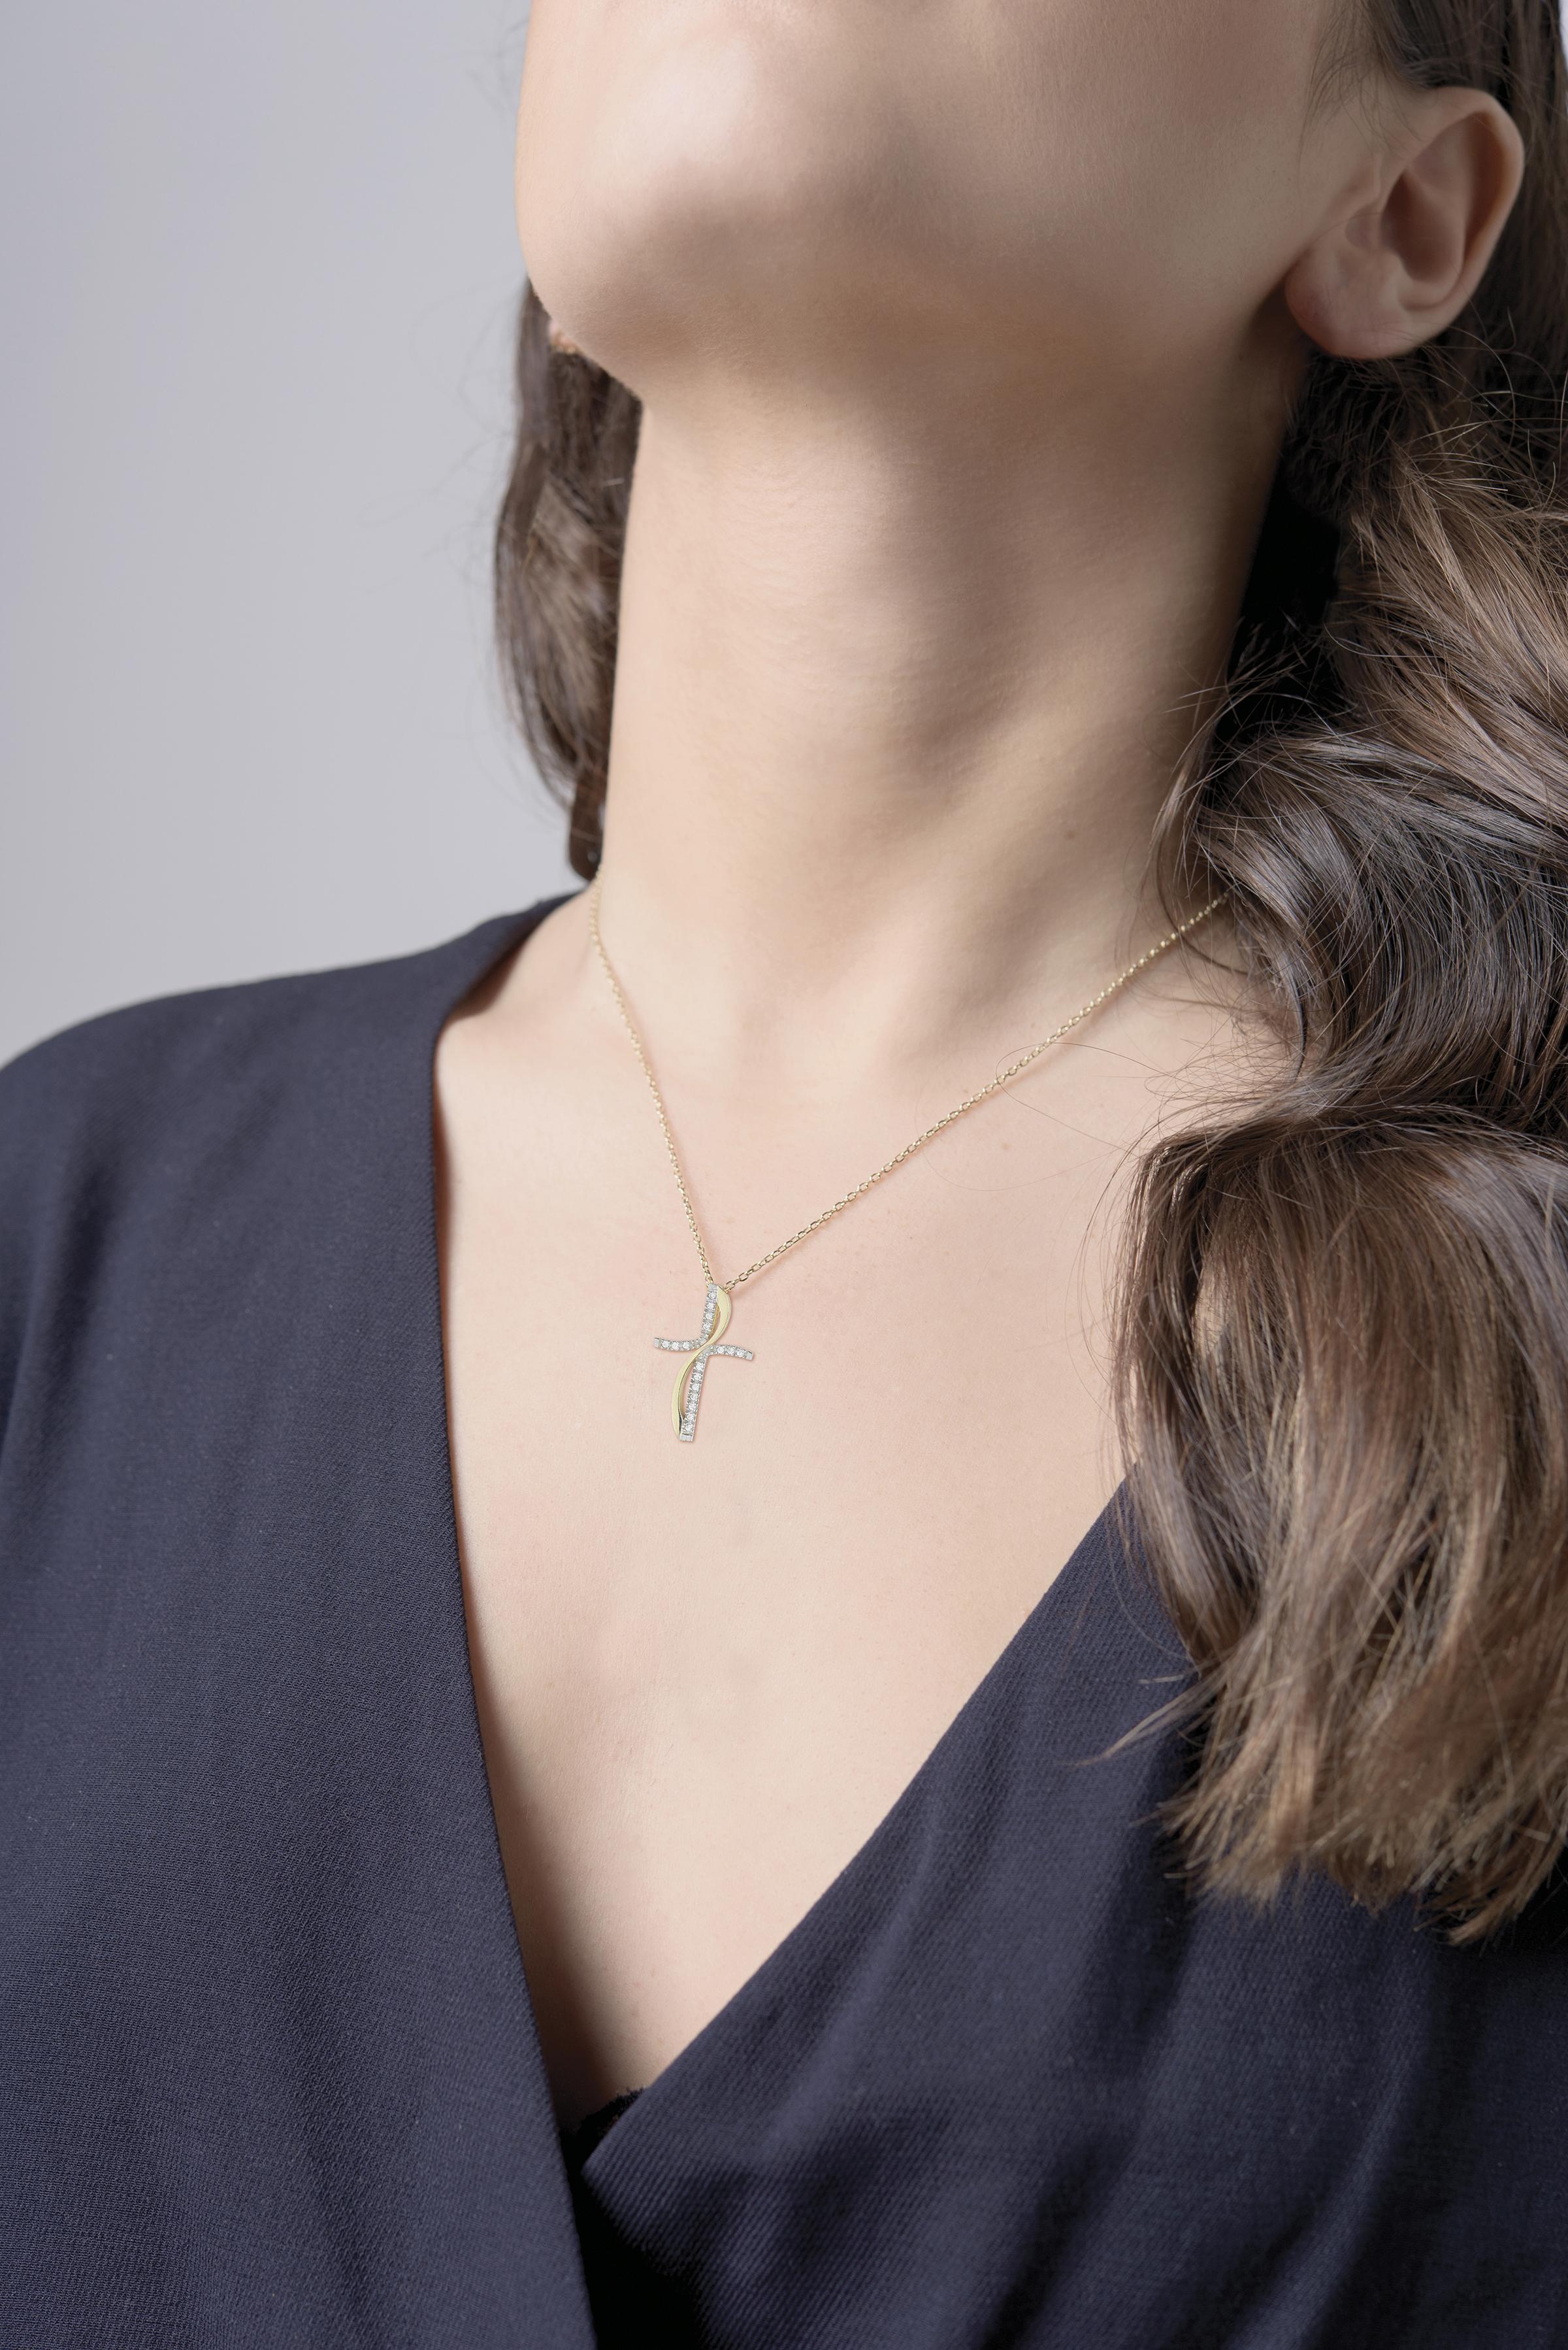 methodist cross and flame necklace